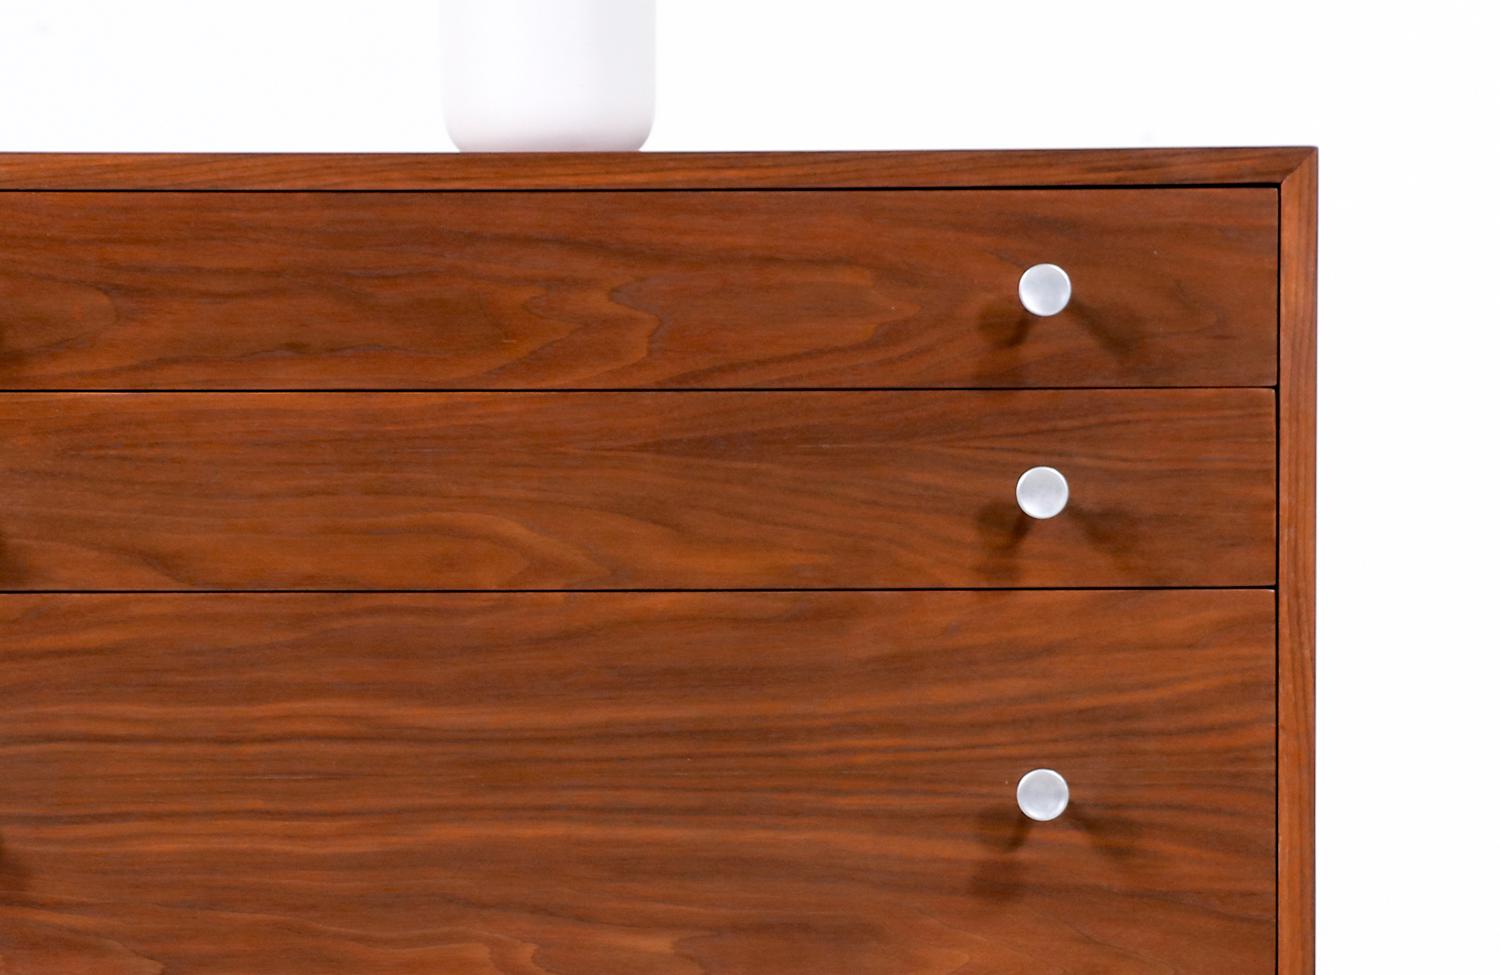 California Modern Walnut Dresser with Tulip Style Pulls by Milo Baughman In Excellent Condition For Sale In Los Angeles, CA